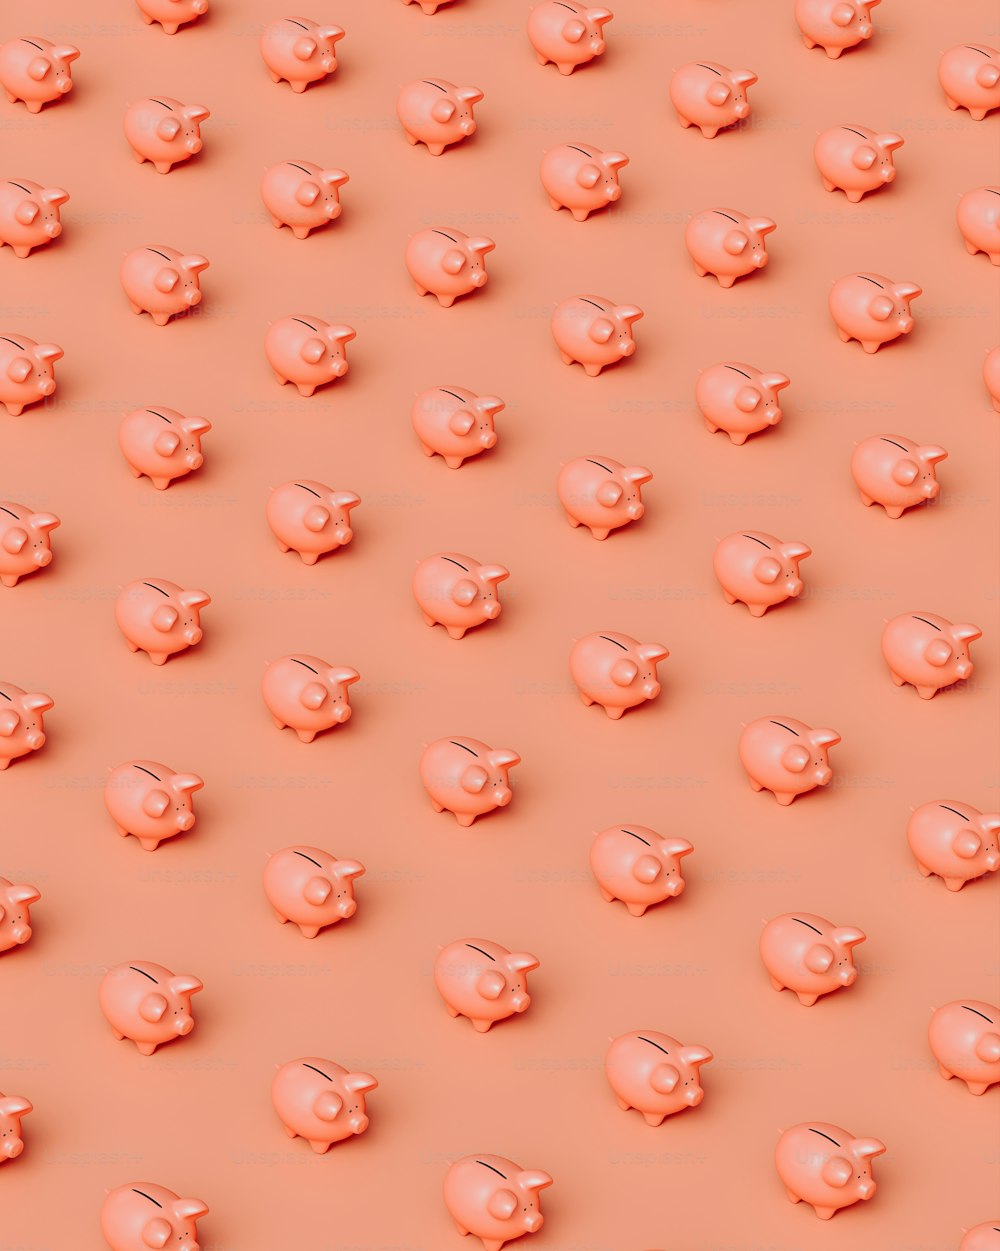 a large group of little pink elephants on a pink background